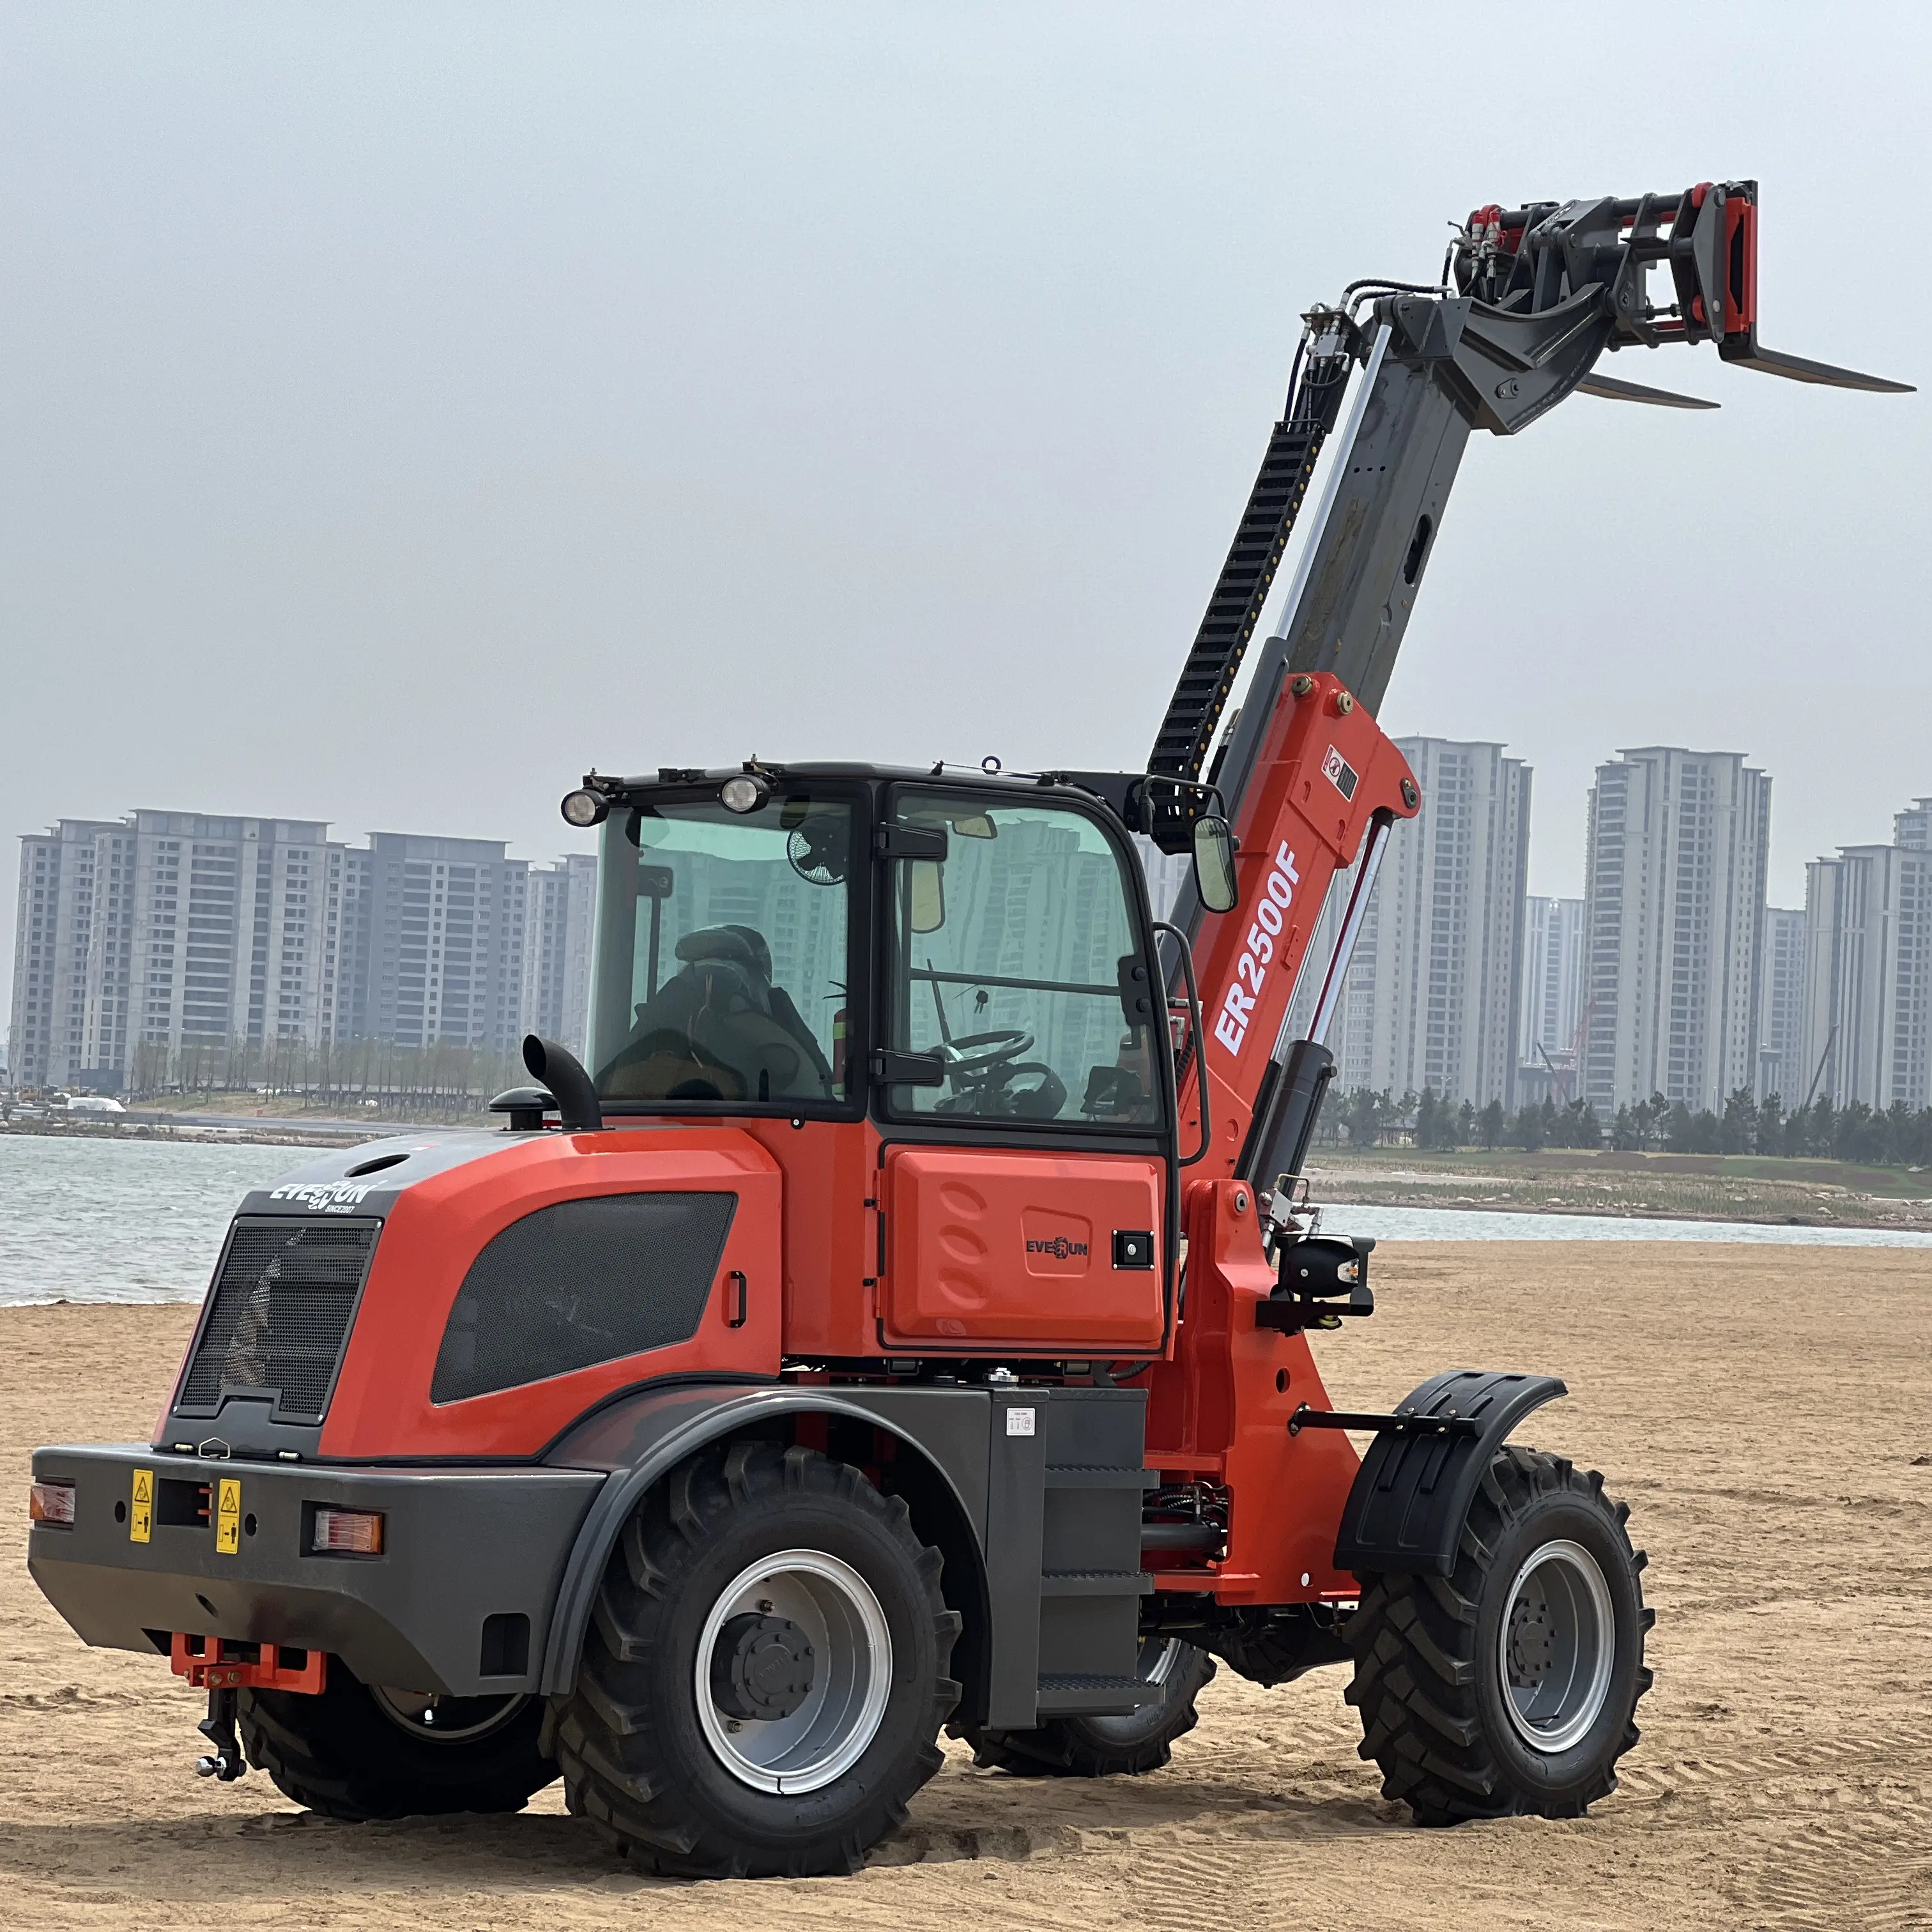 Everun ER2500F 2500kg Wheel Loader Compacted small Construction Telescopic Loaders for sale